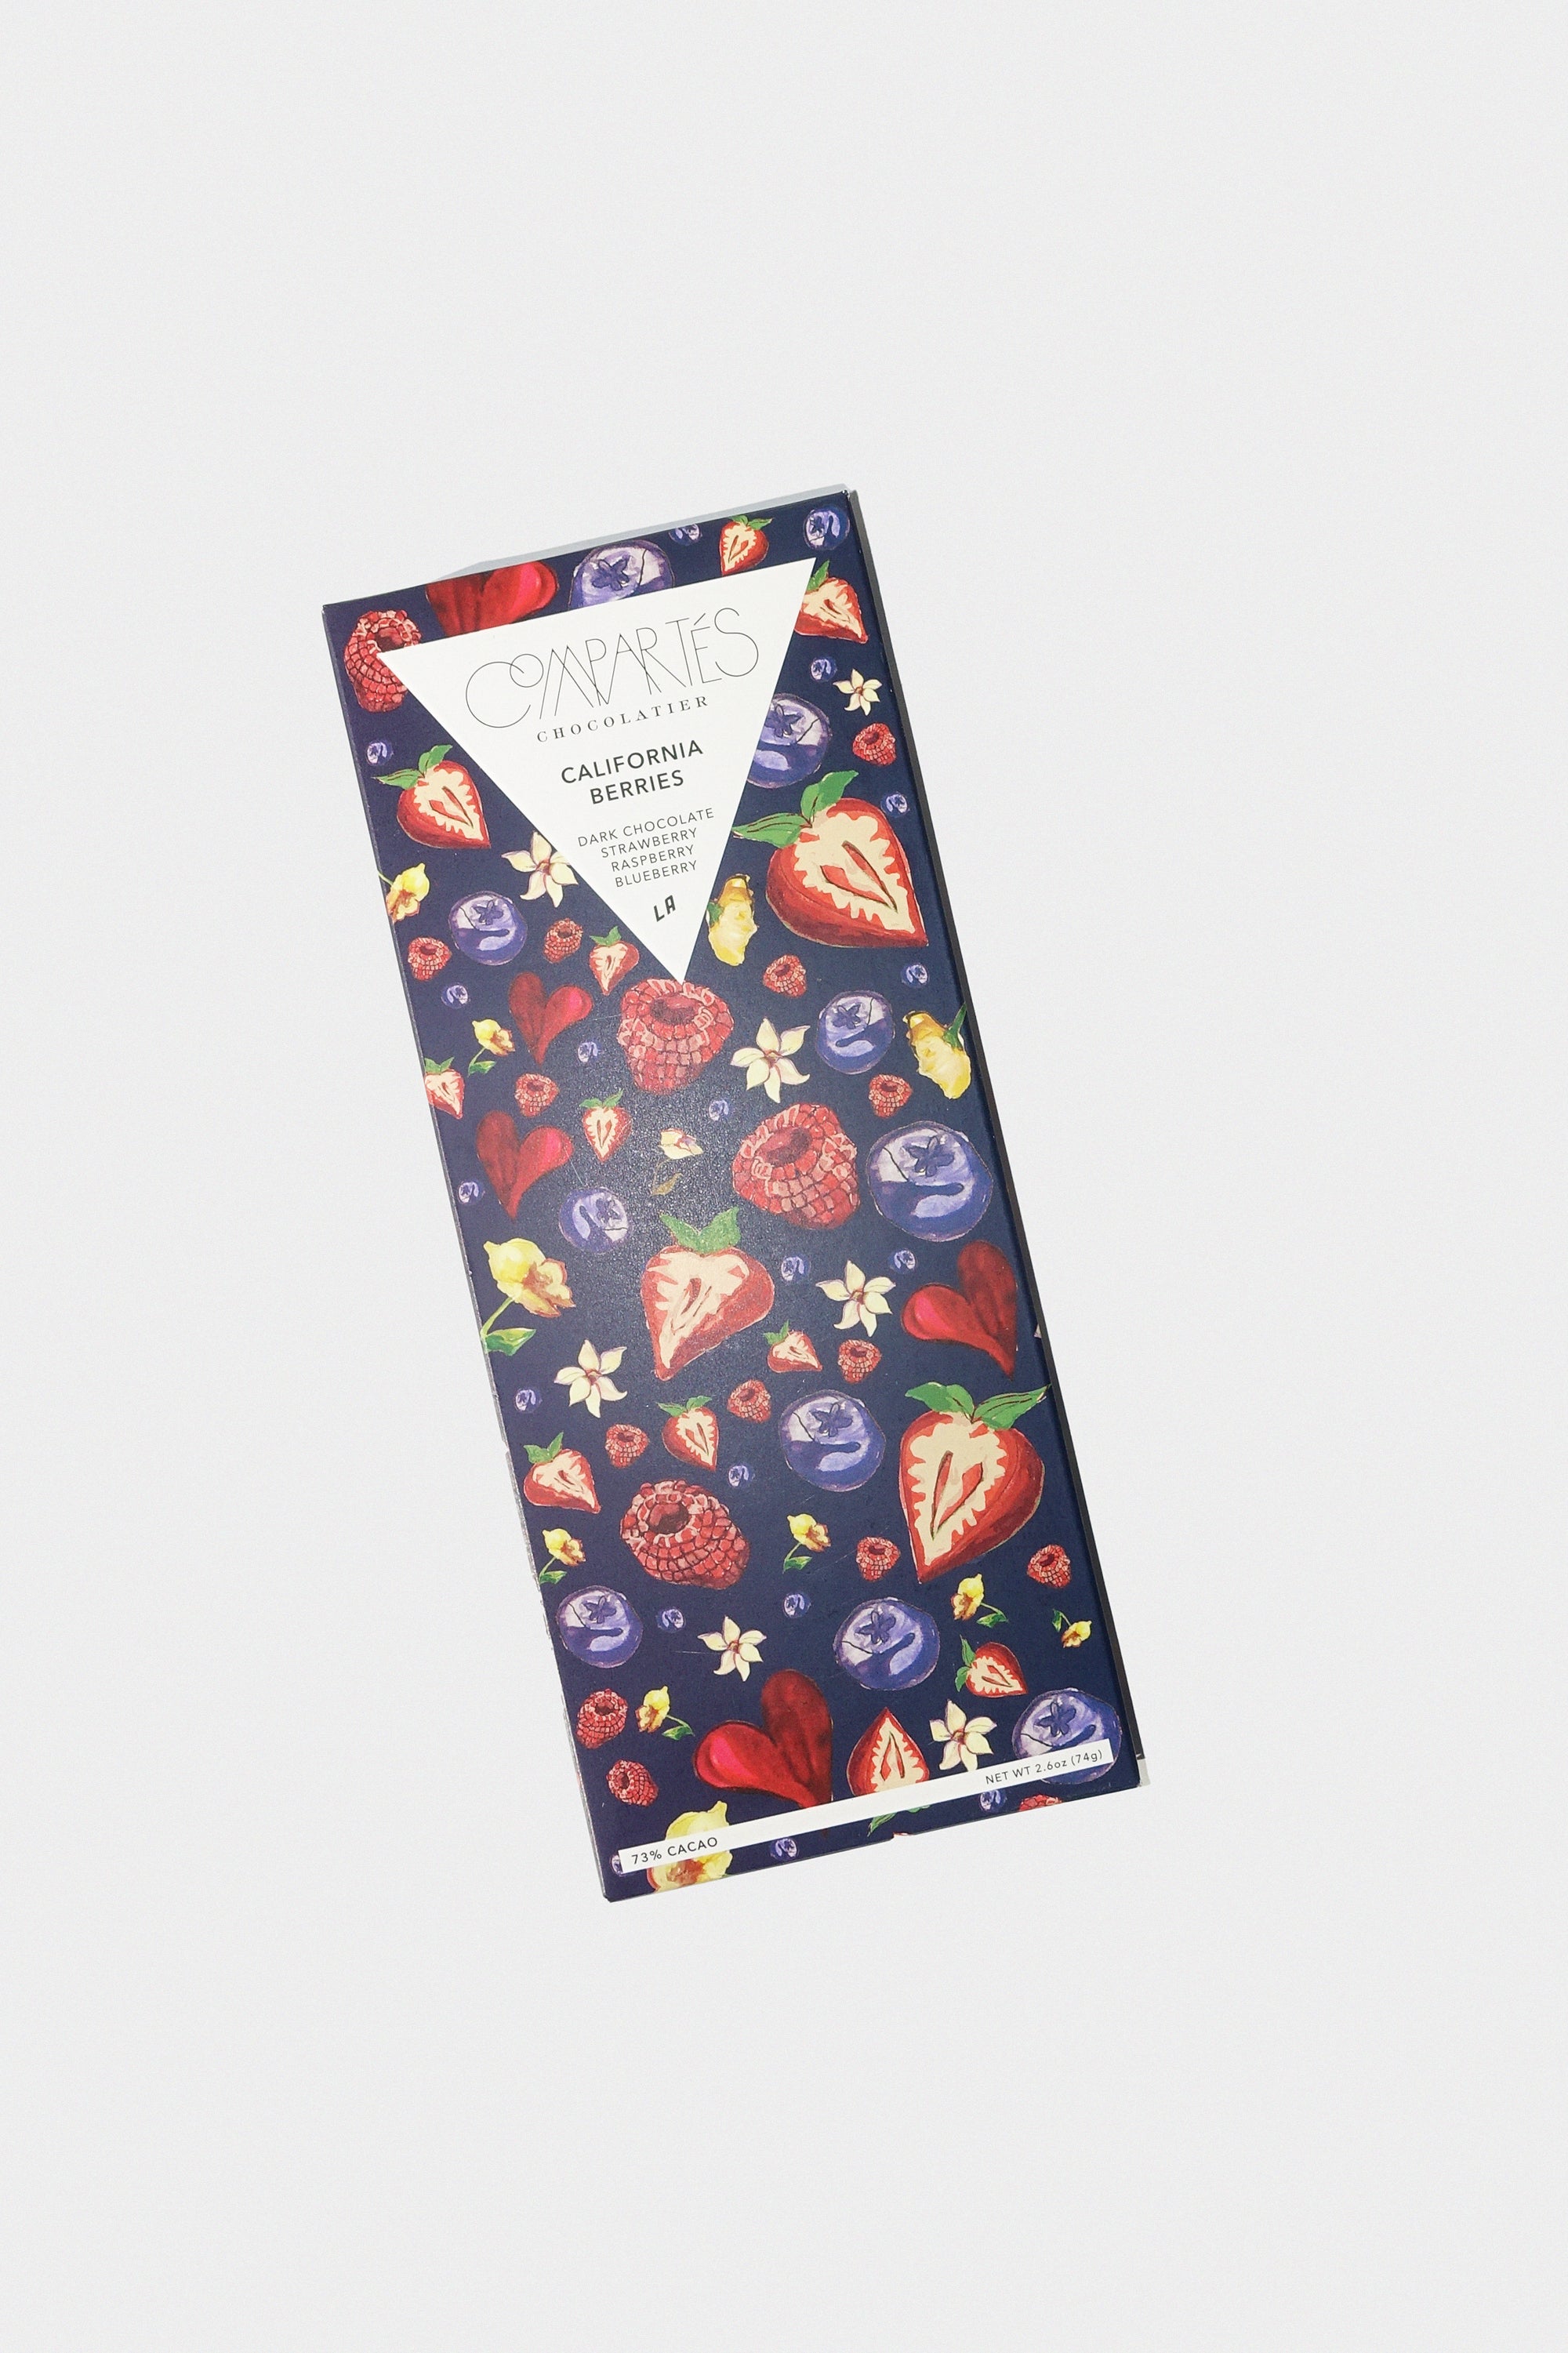 California Berries Dark Chocolate Bar by Compartes